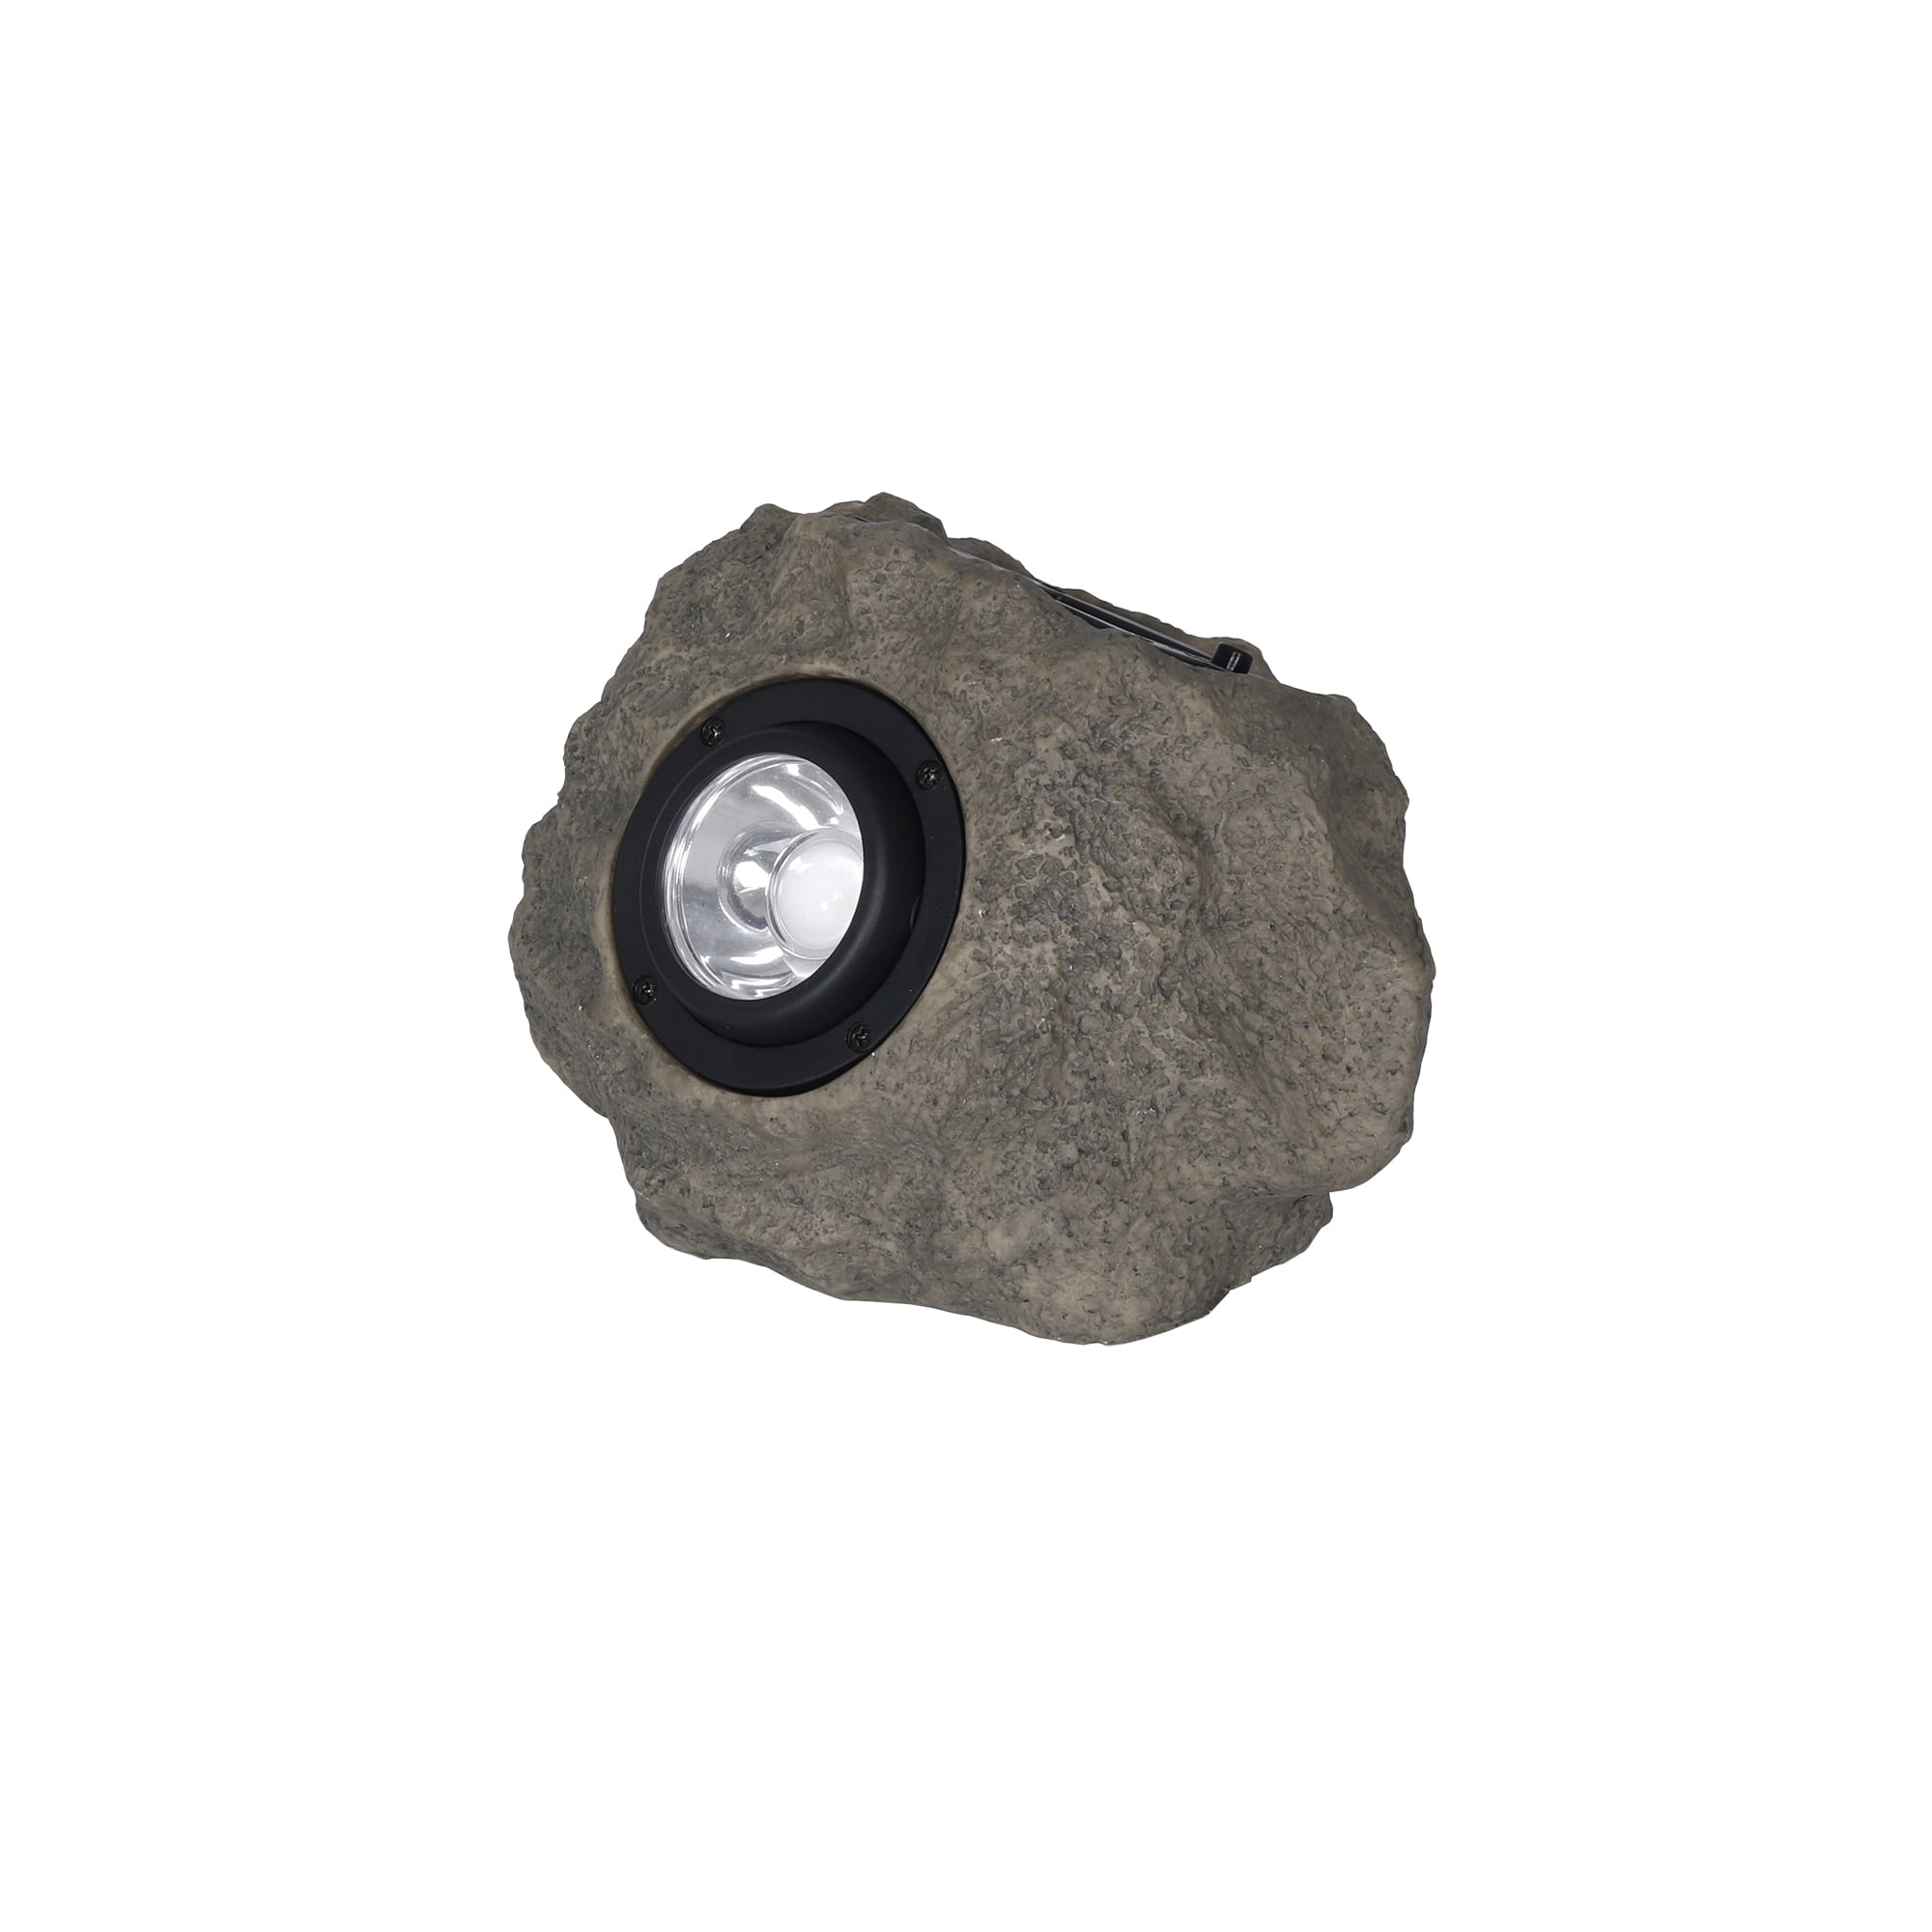 Mainstays Solar Powered Rock Landscape LED Spotlight with Key Compartment